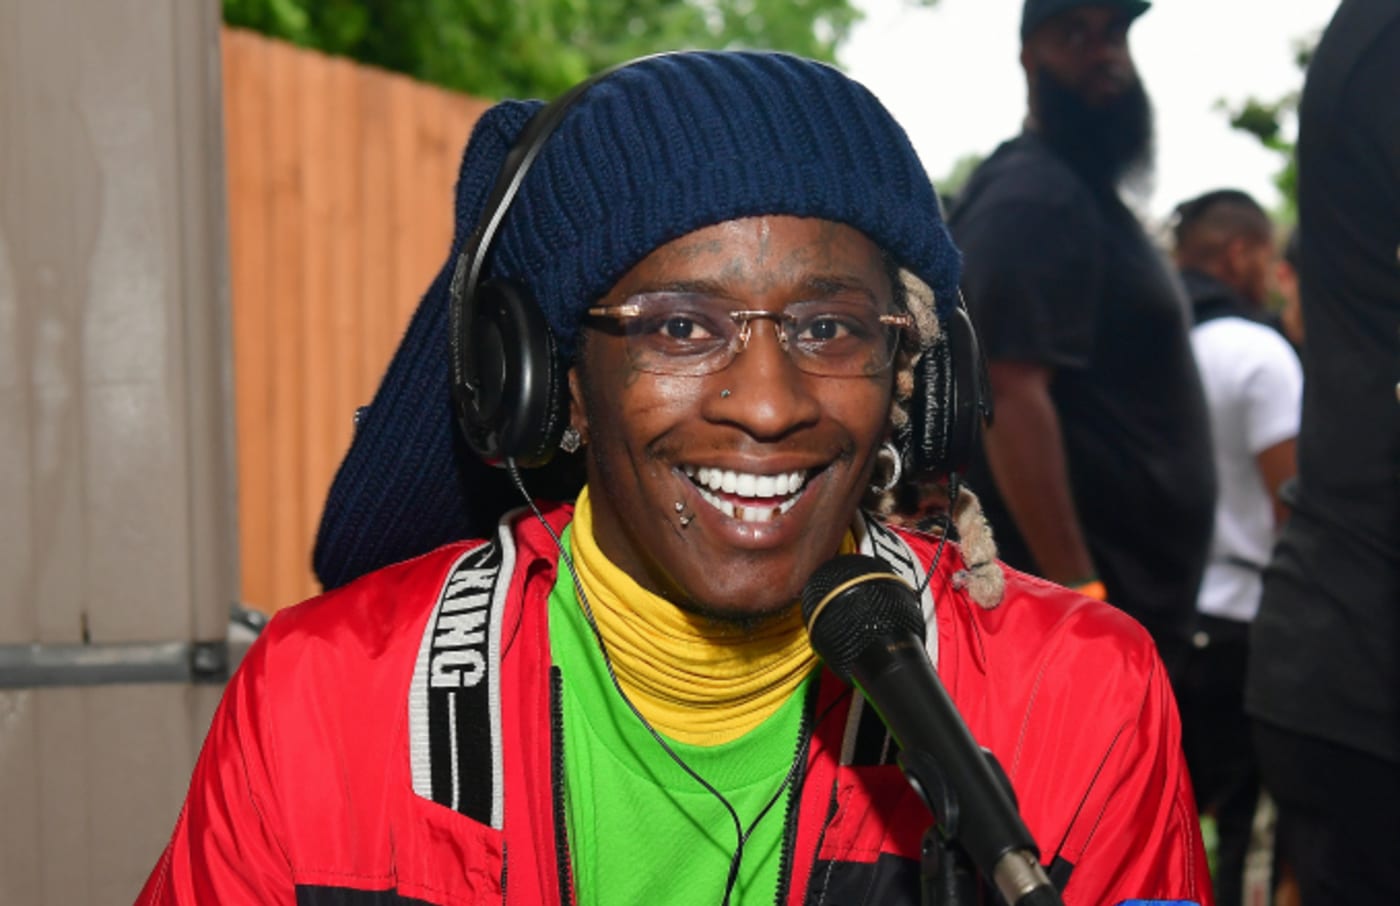 Rapper young Thug during the 2019 Tycoon Music Festival